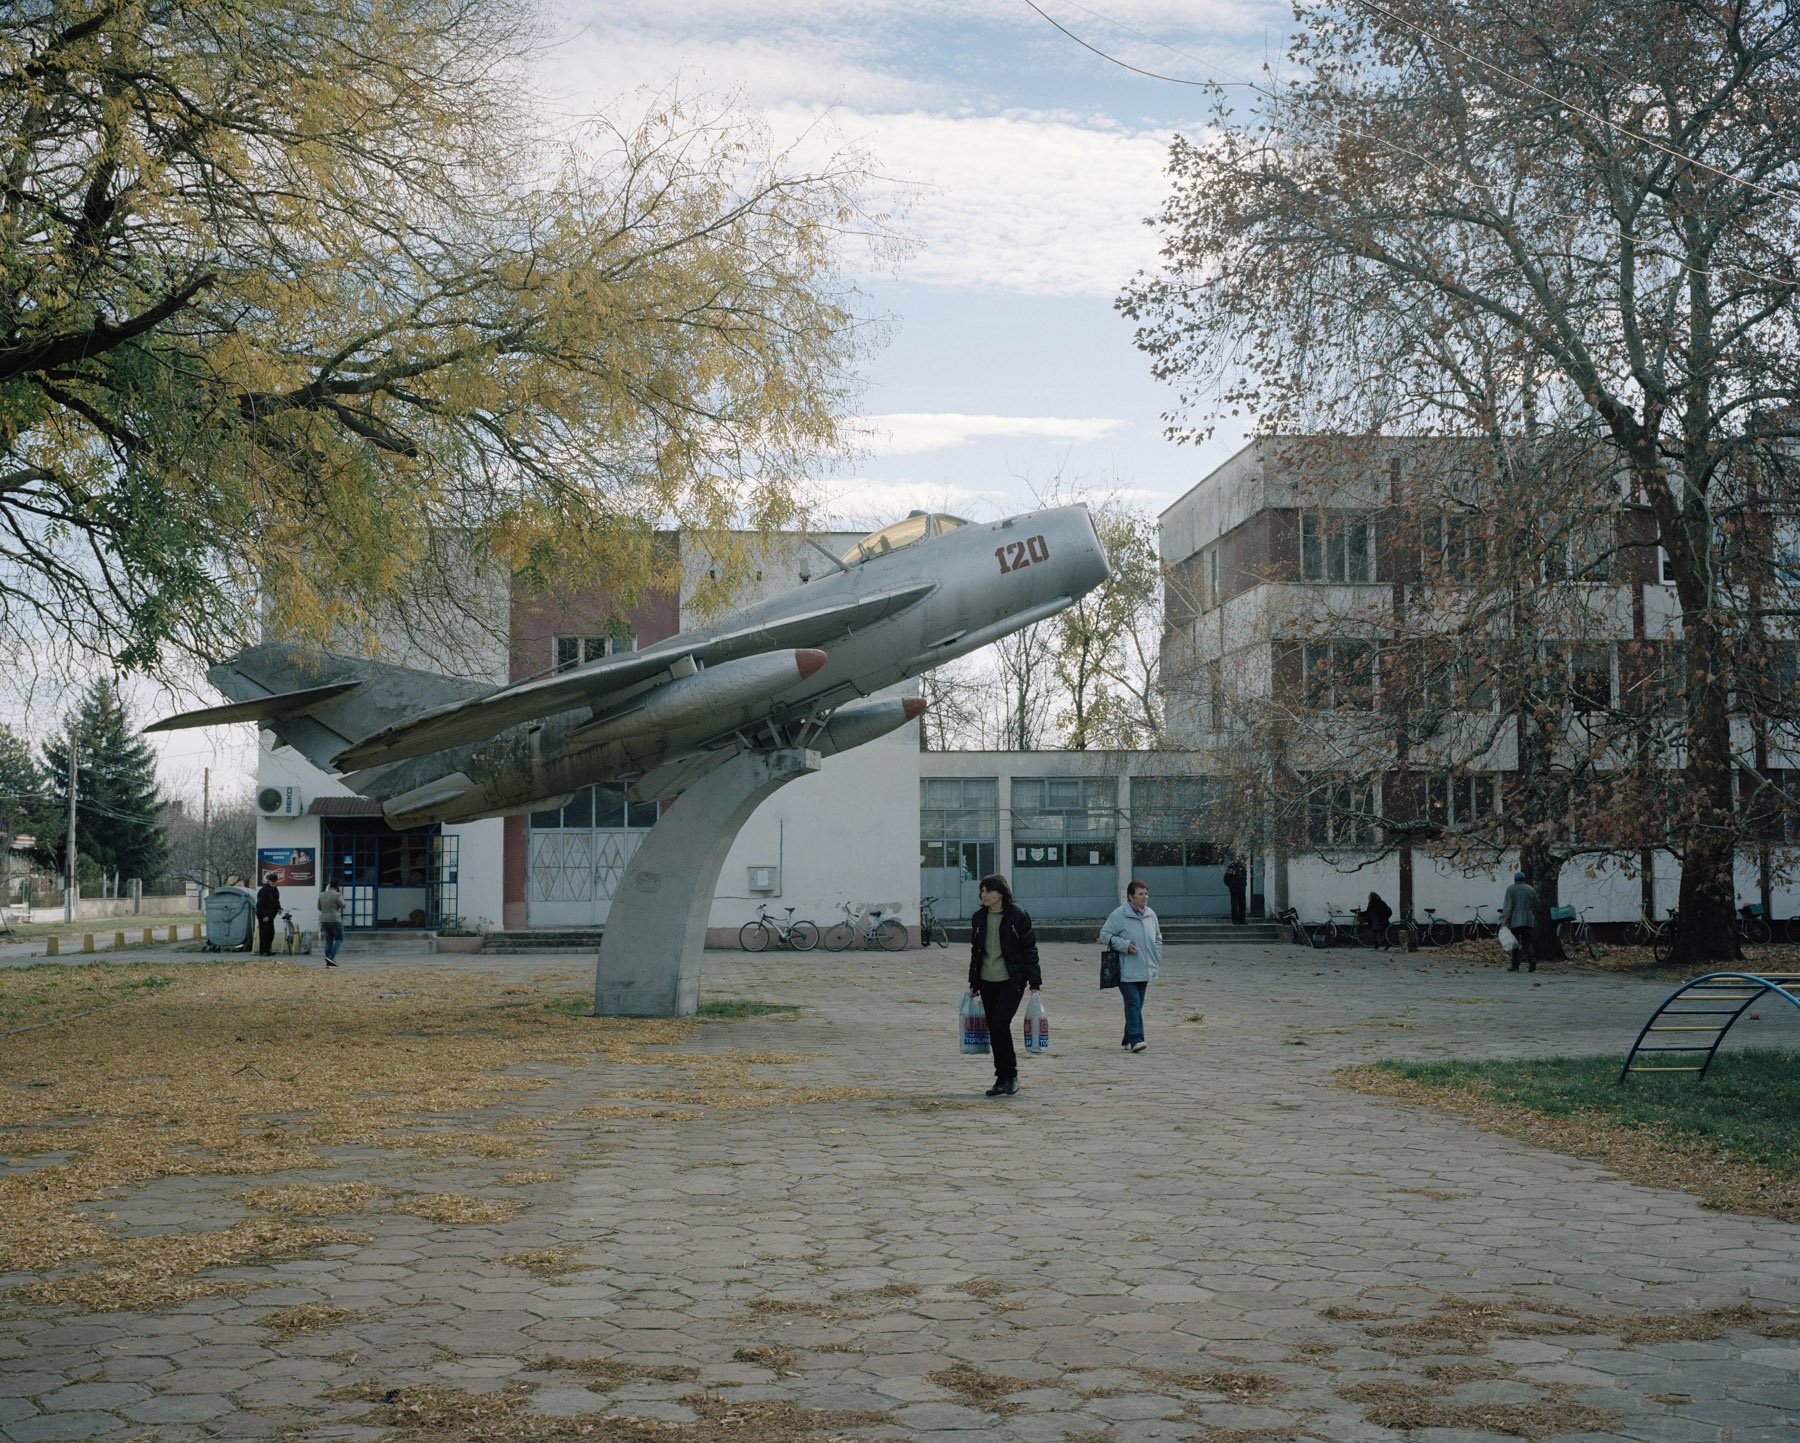  Bulgaria, Bardaski Geran. 2016. A MIG plane, Russian Cold War jet fighter aircraft in front of the Town Hall. In Bulgaria are still present several war-related monuments. These Russian Military monuments, standing in the places where they are displa